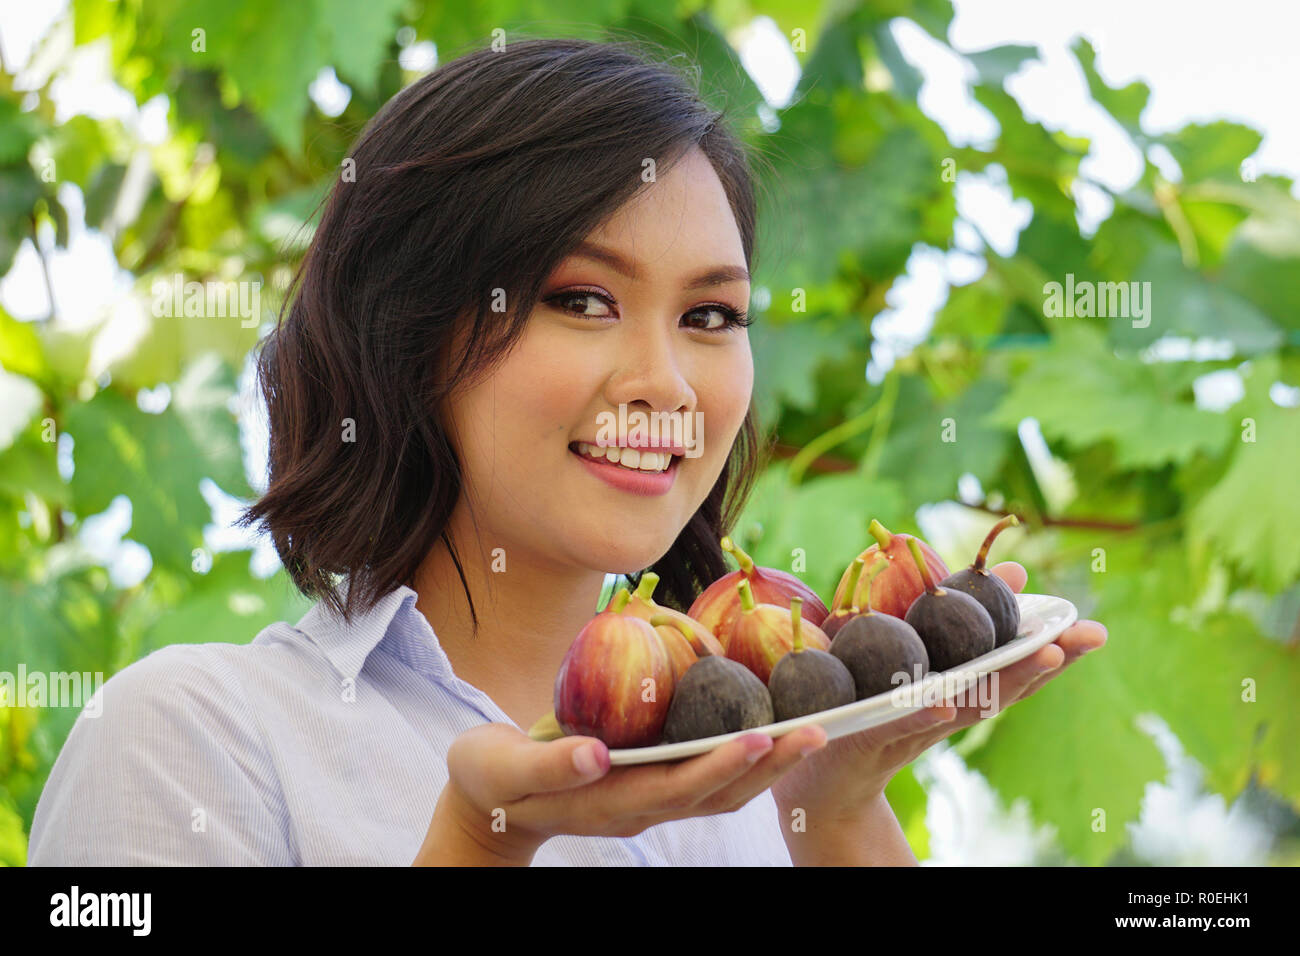 Young beautiful asian woman smile while holding a plate of fresh fig fruits. A good concept picture for fruit eating promoting healthy food and eating Stock Photo